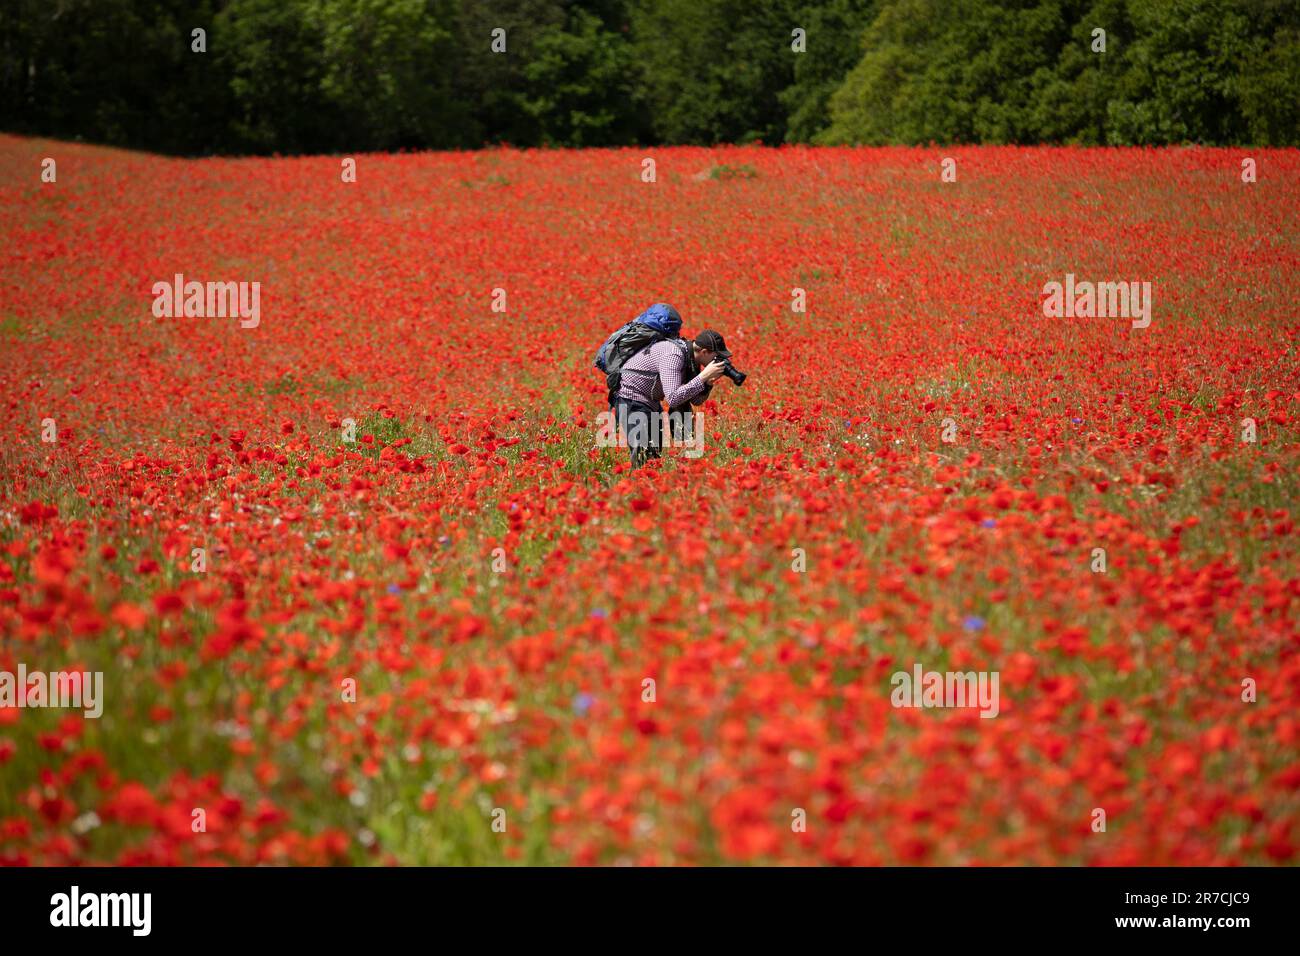 A man taking photographs in a field of poppies in Stourport, Worcestershire. Stock Photo